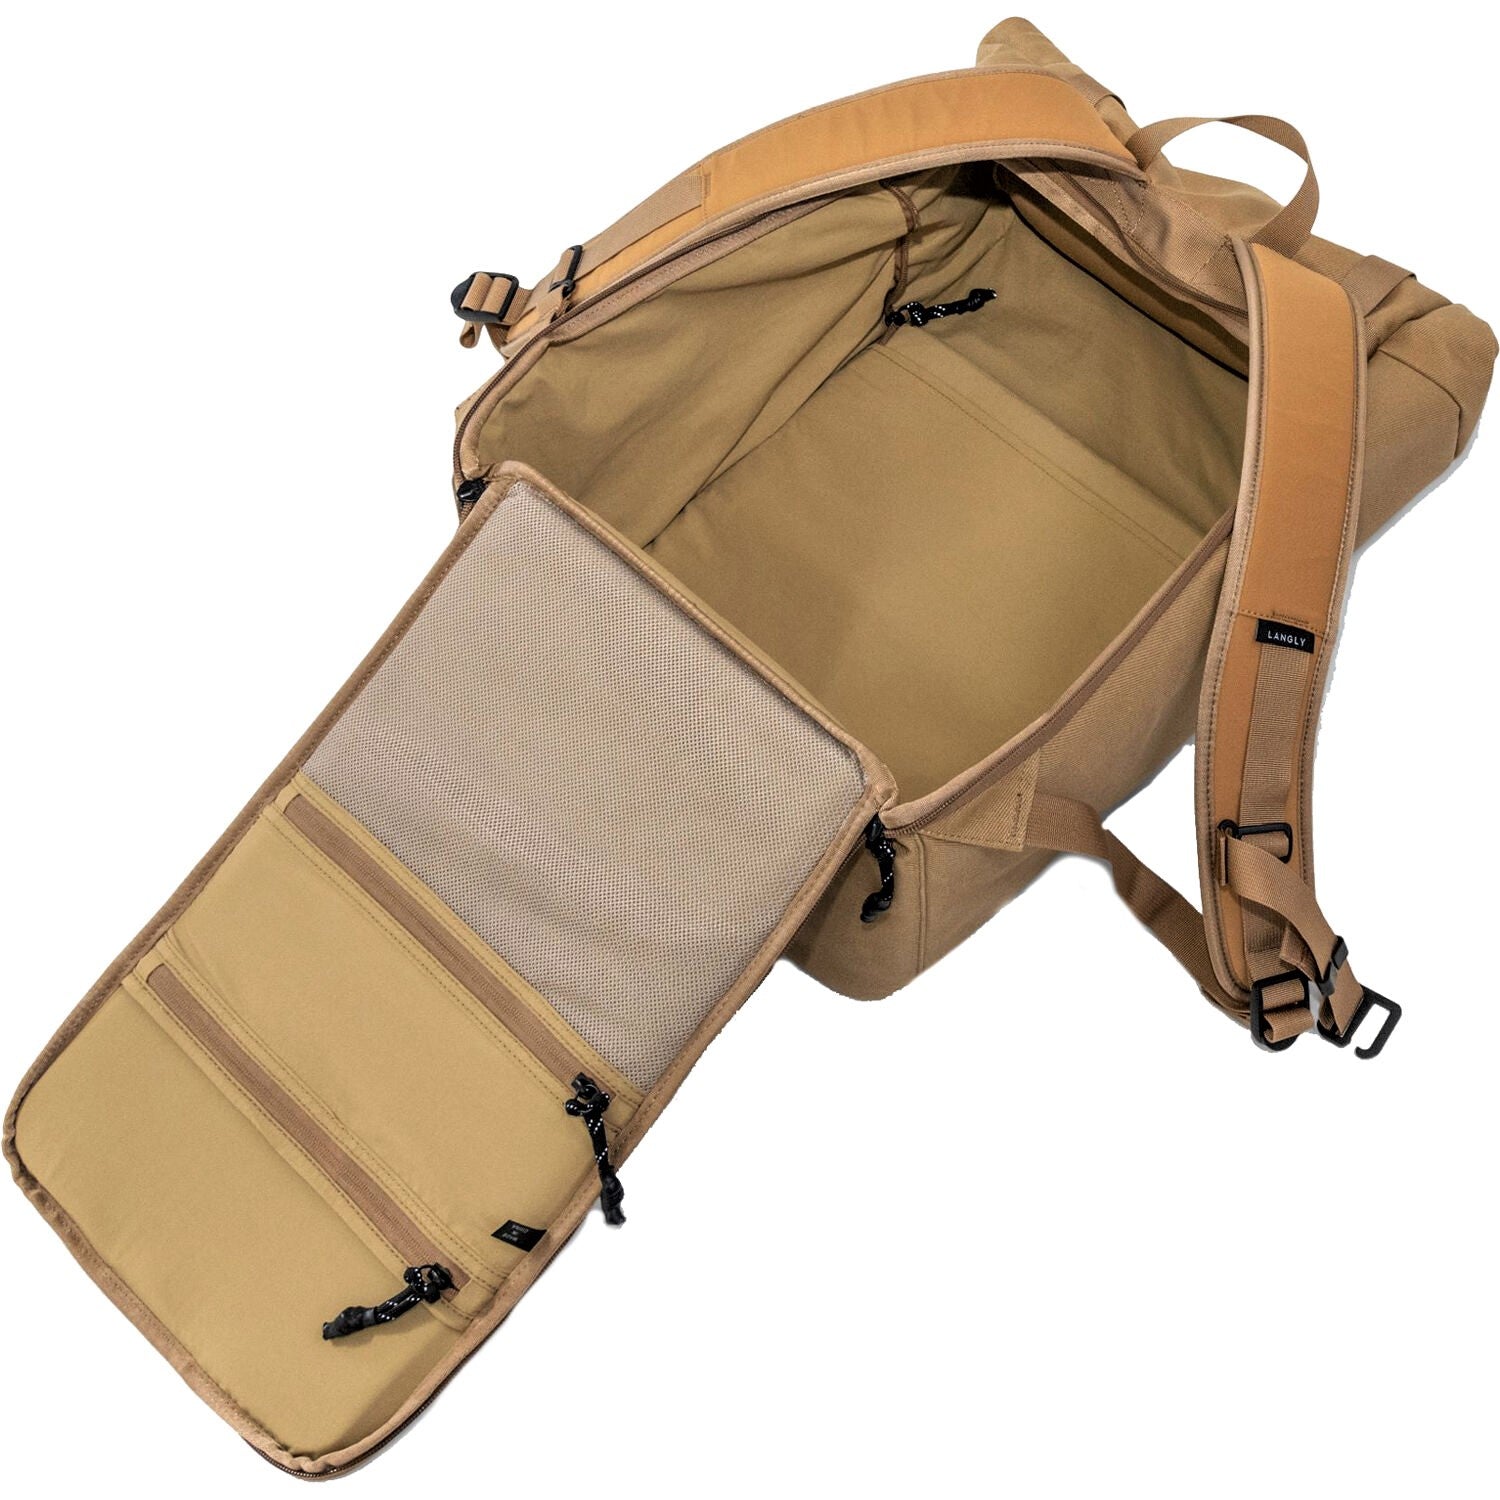 Langly Weekender Backpack with Camera Cube (Sand)